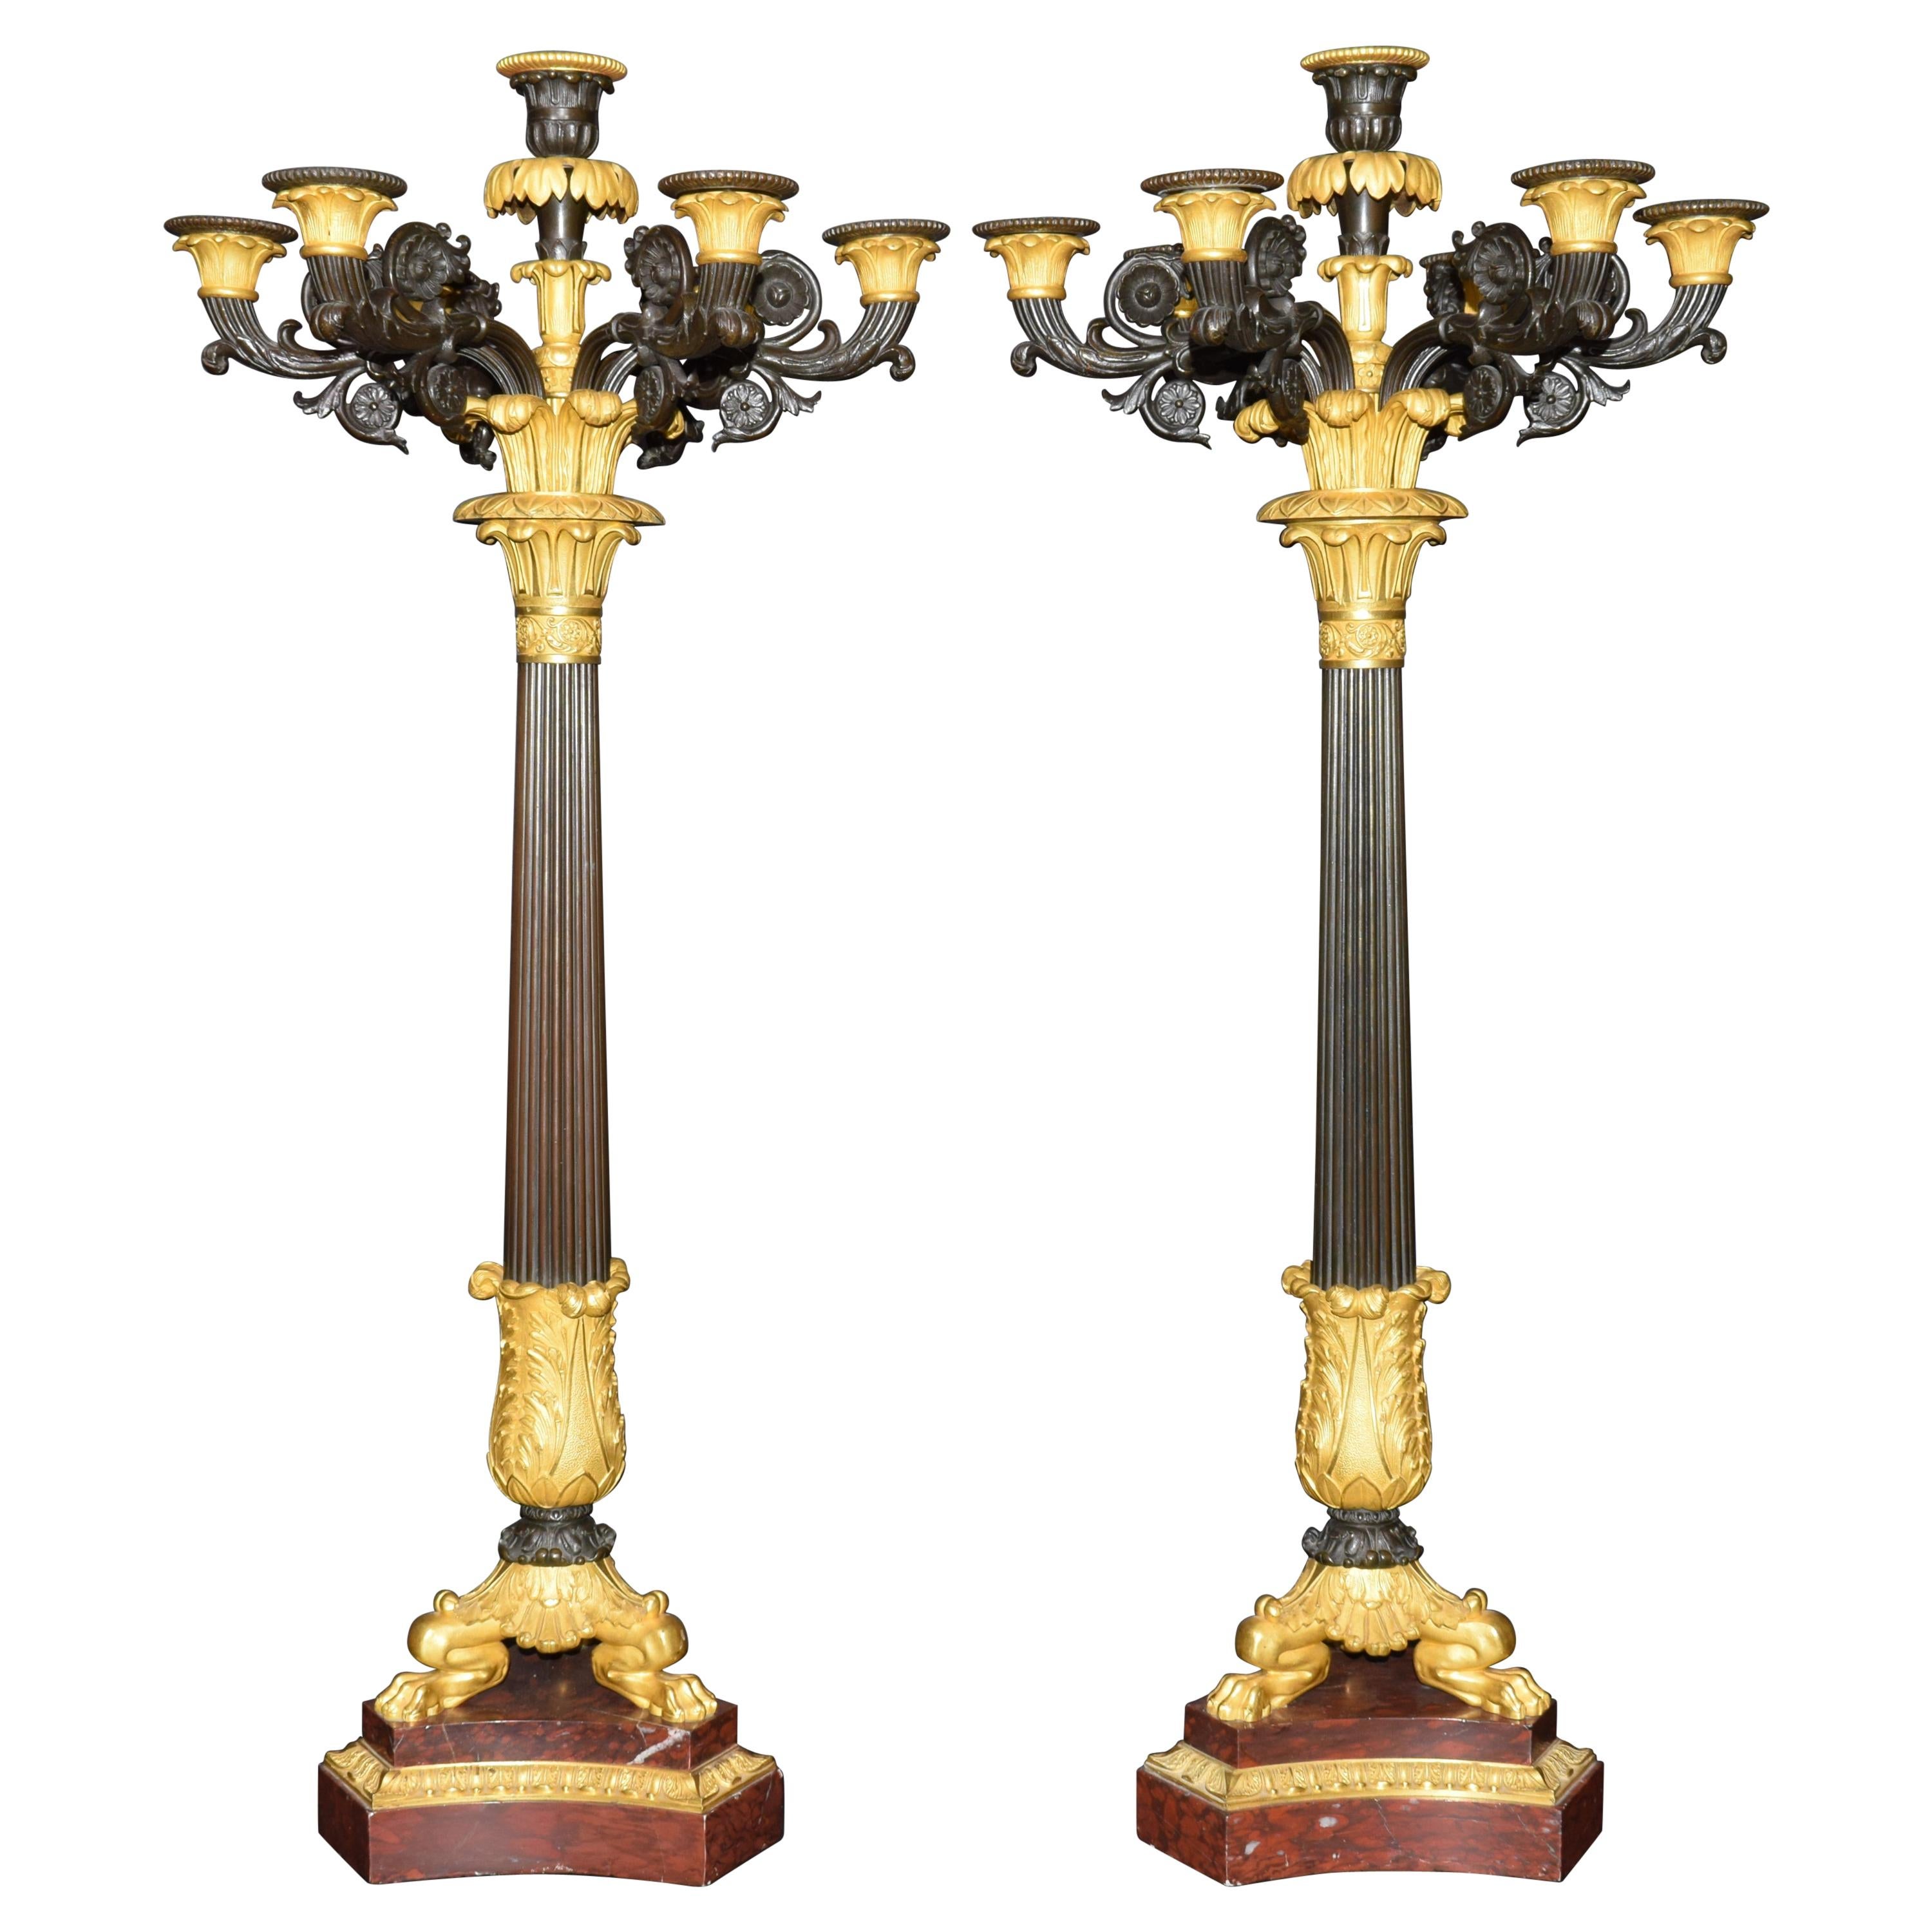 Pair of Gilt Bronze Candlesticks on Marble For Sale